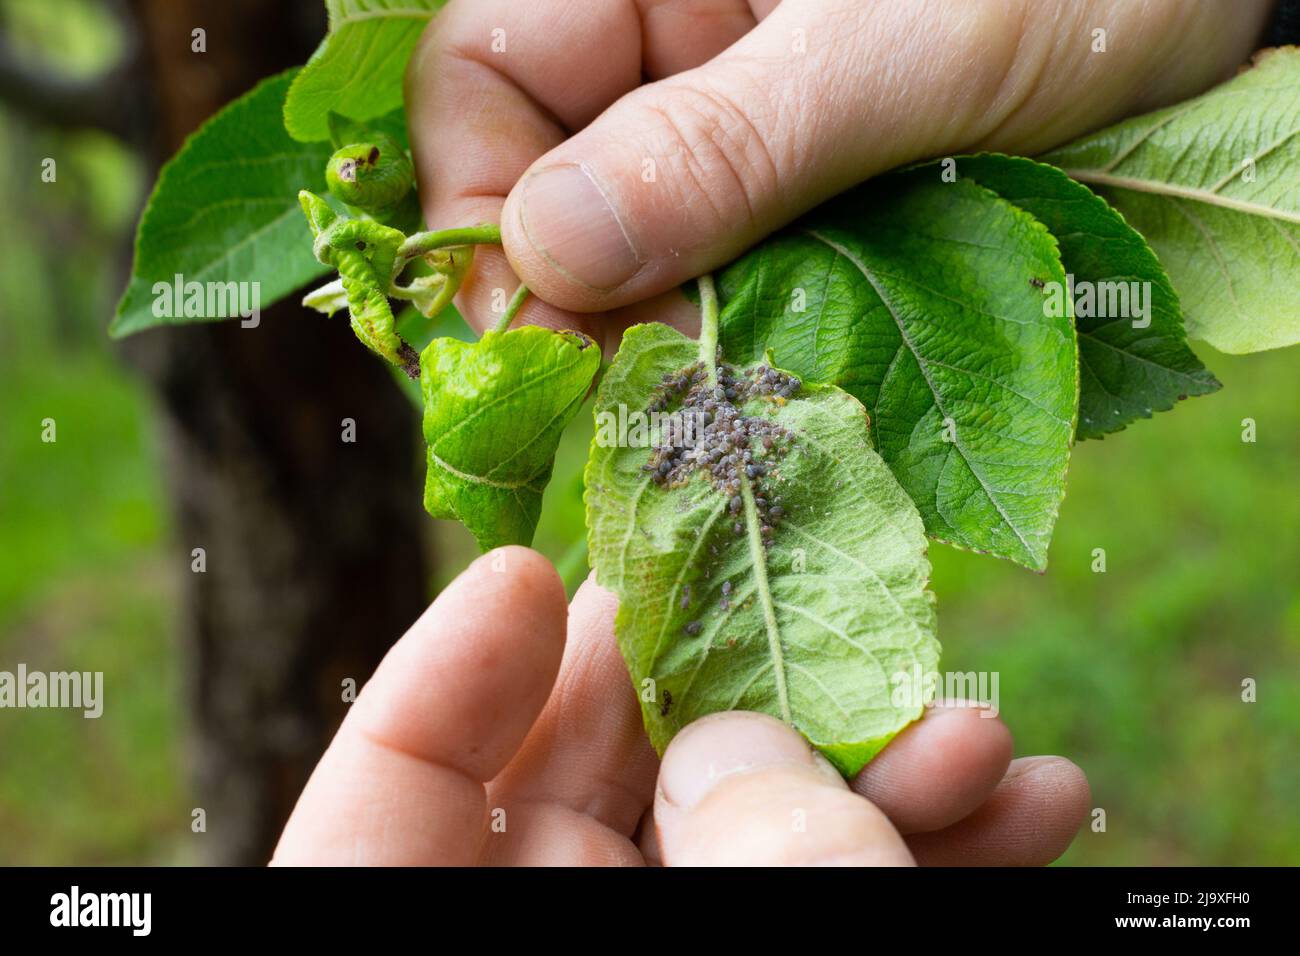 Control of aphids on plants. The fingers of a man hold a leaf on an apple tree with a colony of insect pests. Stock Photo